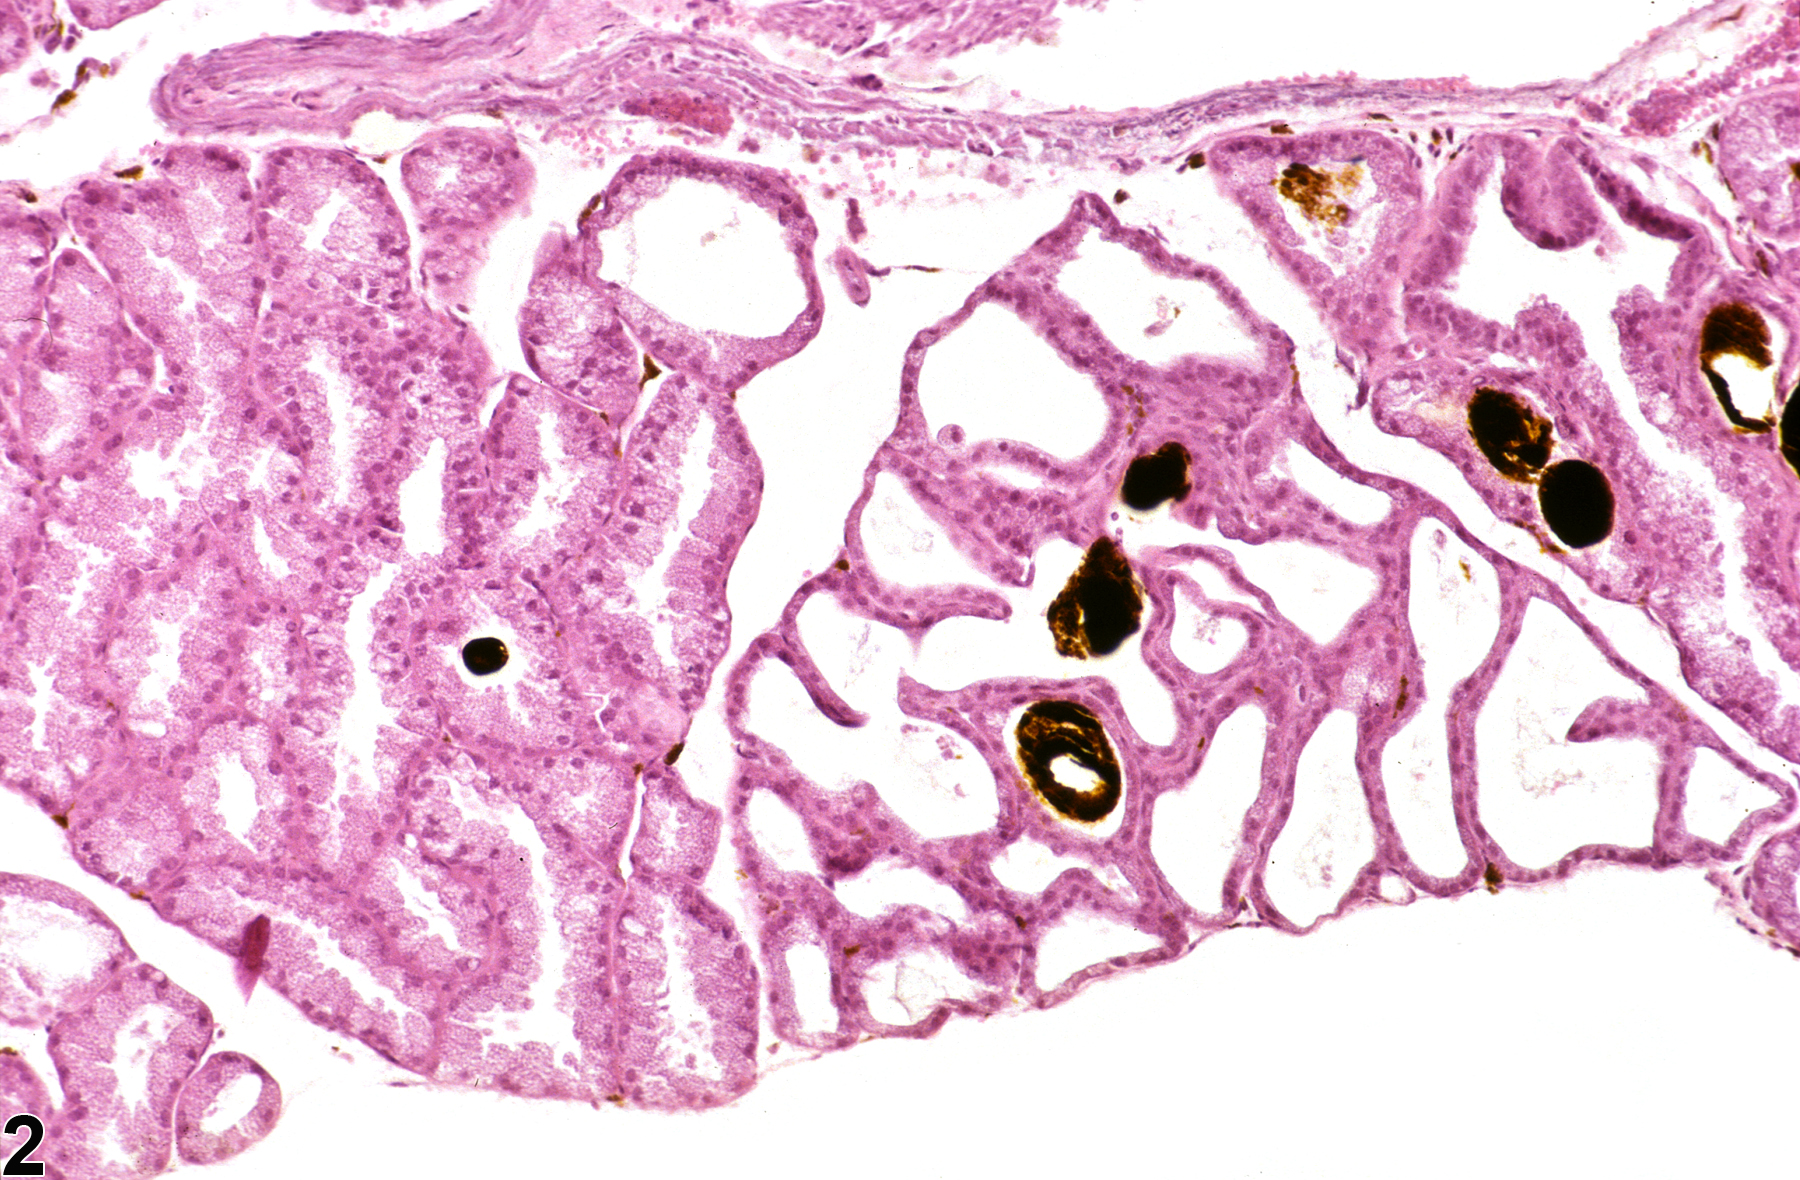 Image of dilation in the Harderian gland from a female B6C3F1 mouse in a chronic study